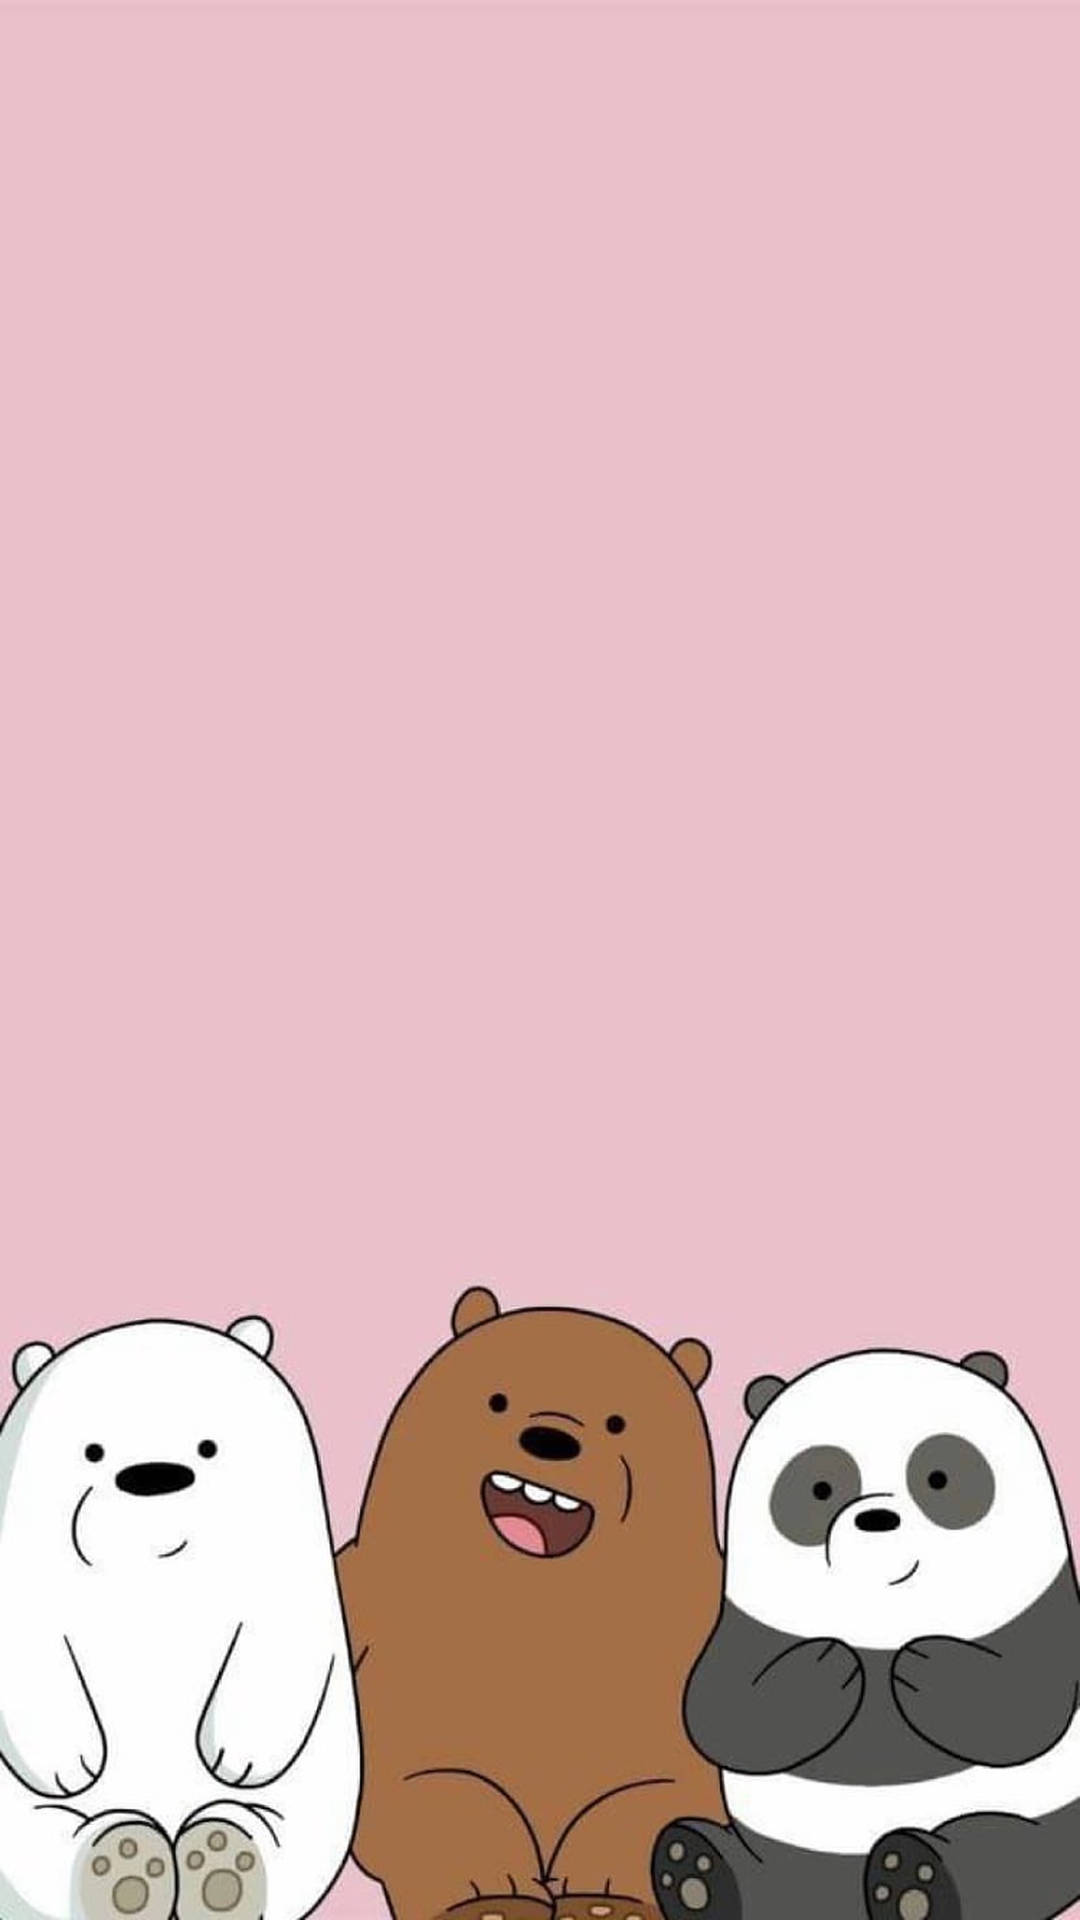 Three Bears Pink Poster Background